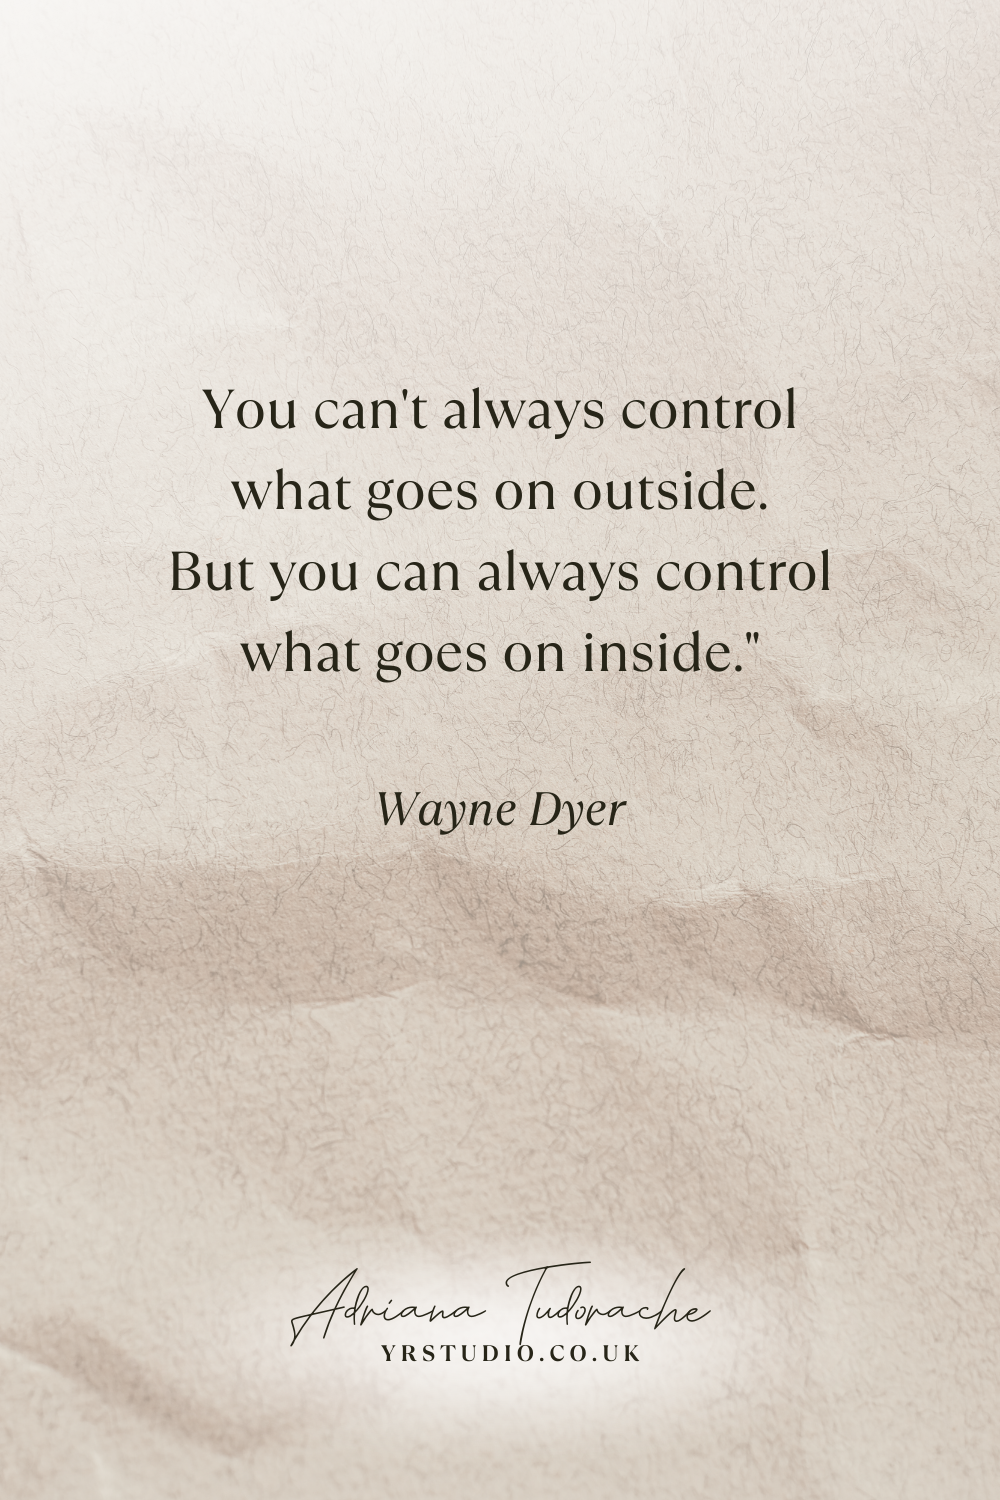 "You can't always control what goes on outside. But you can always control what goes on inside." - Wayne Dyer